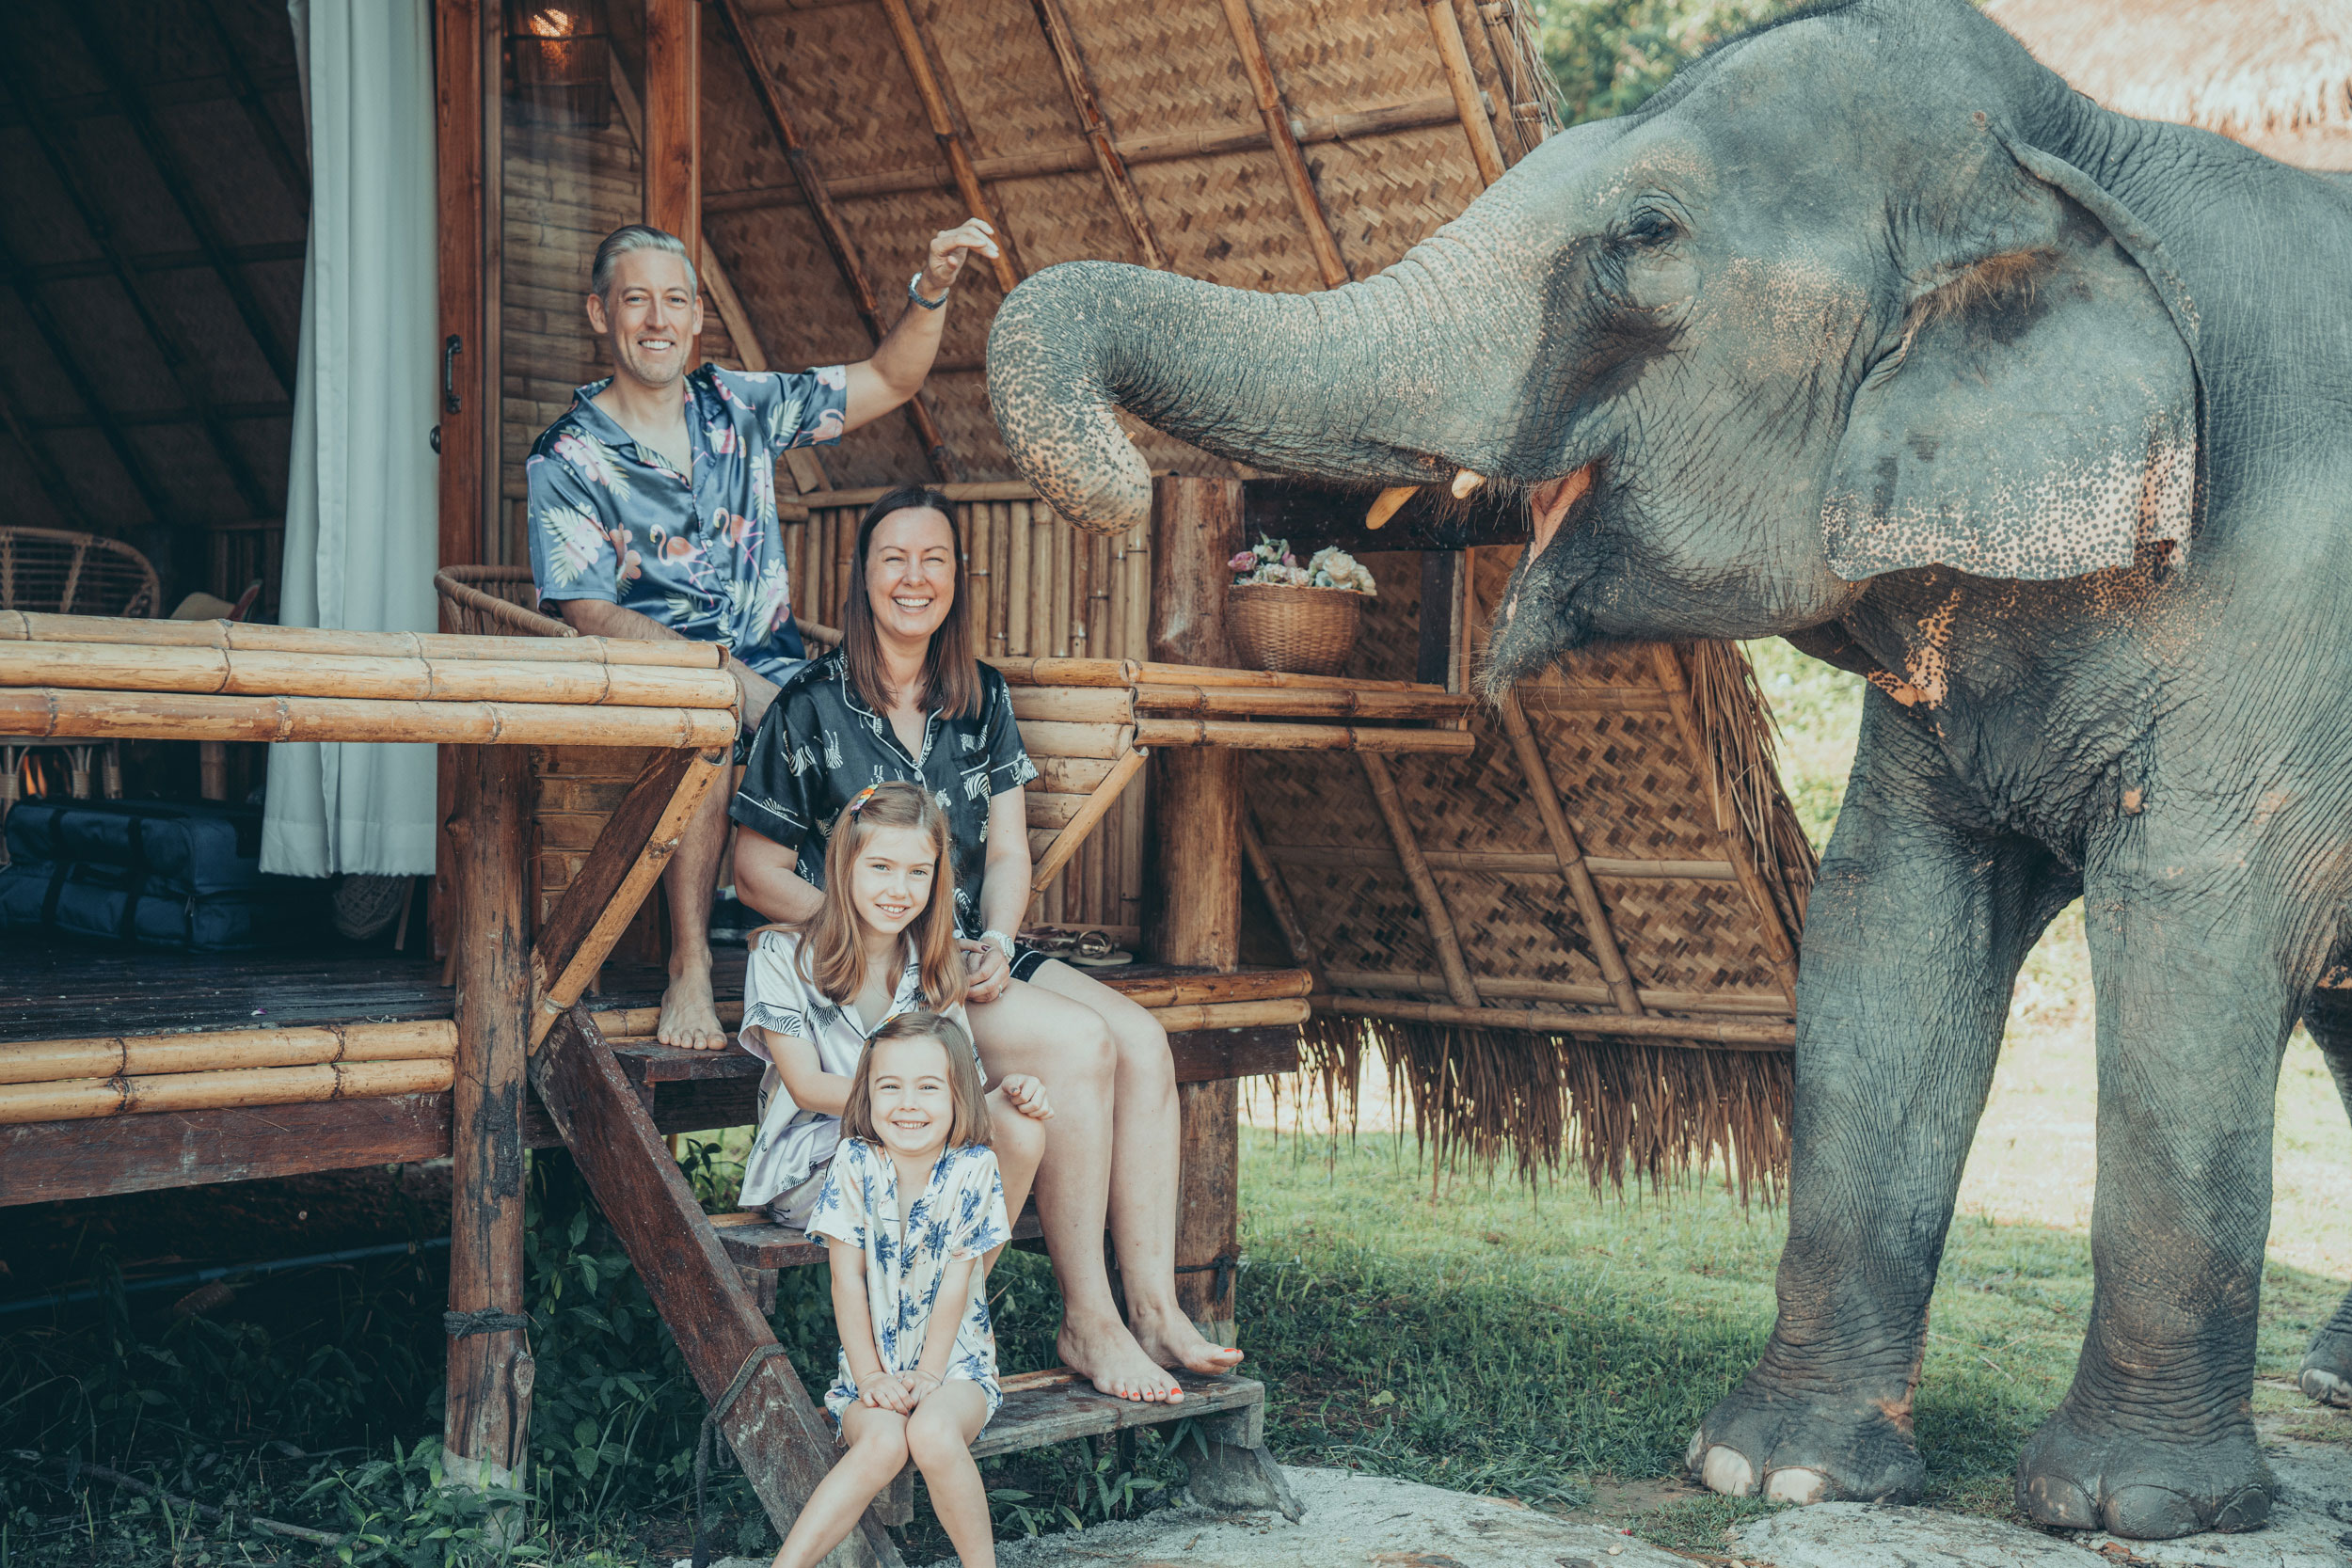 An elephant came to visit us at our hut - Chai Lai Orchid, Chiang Mai